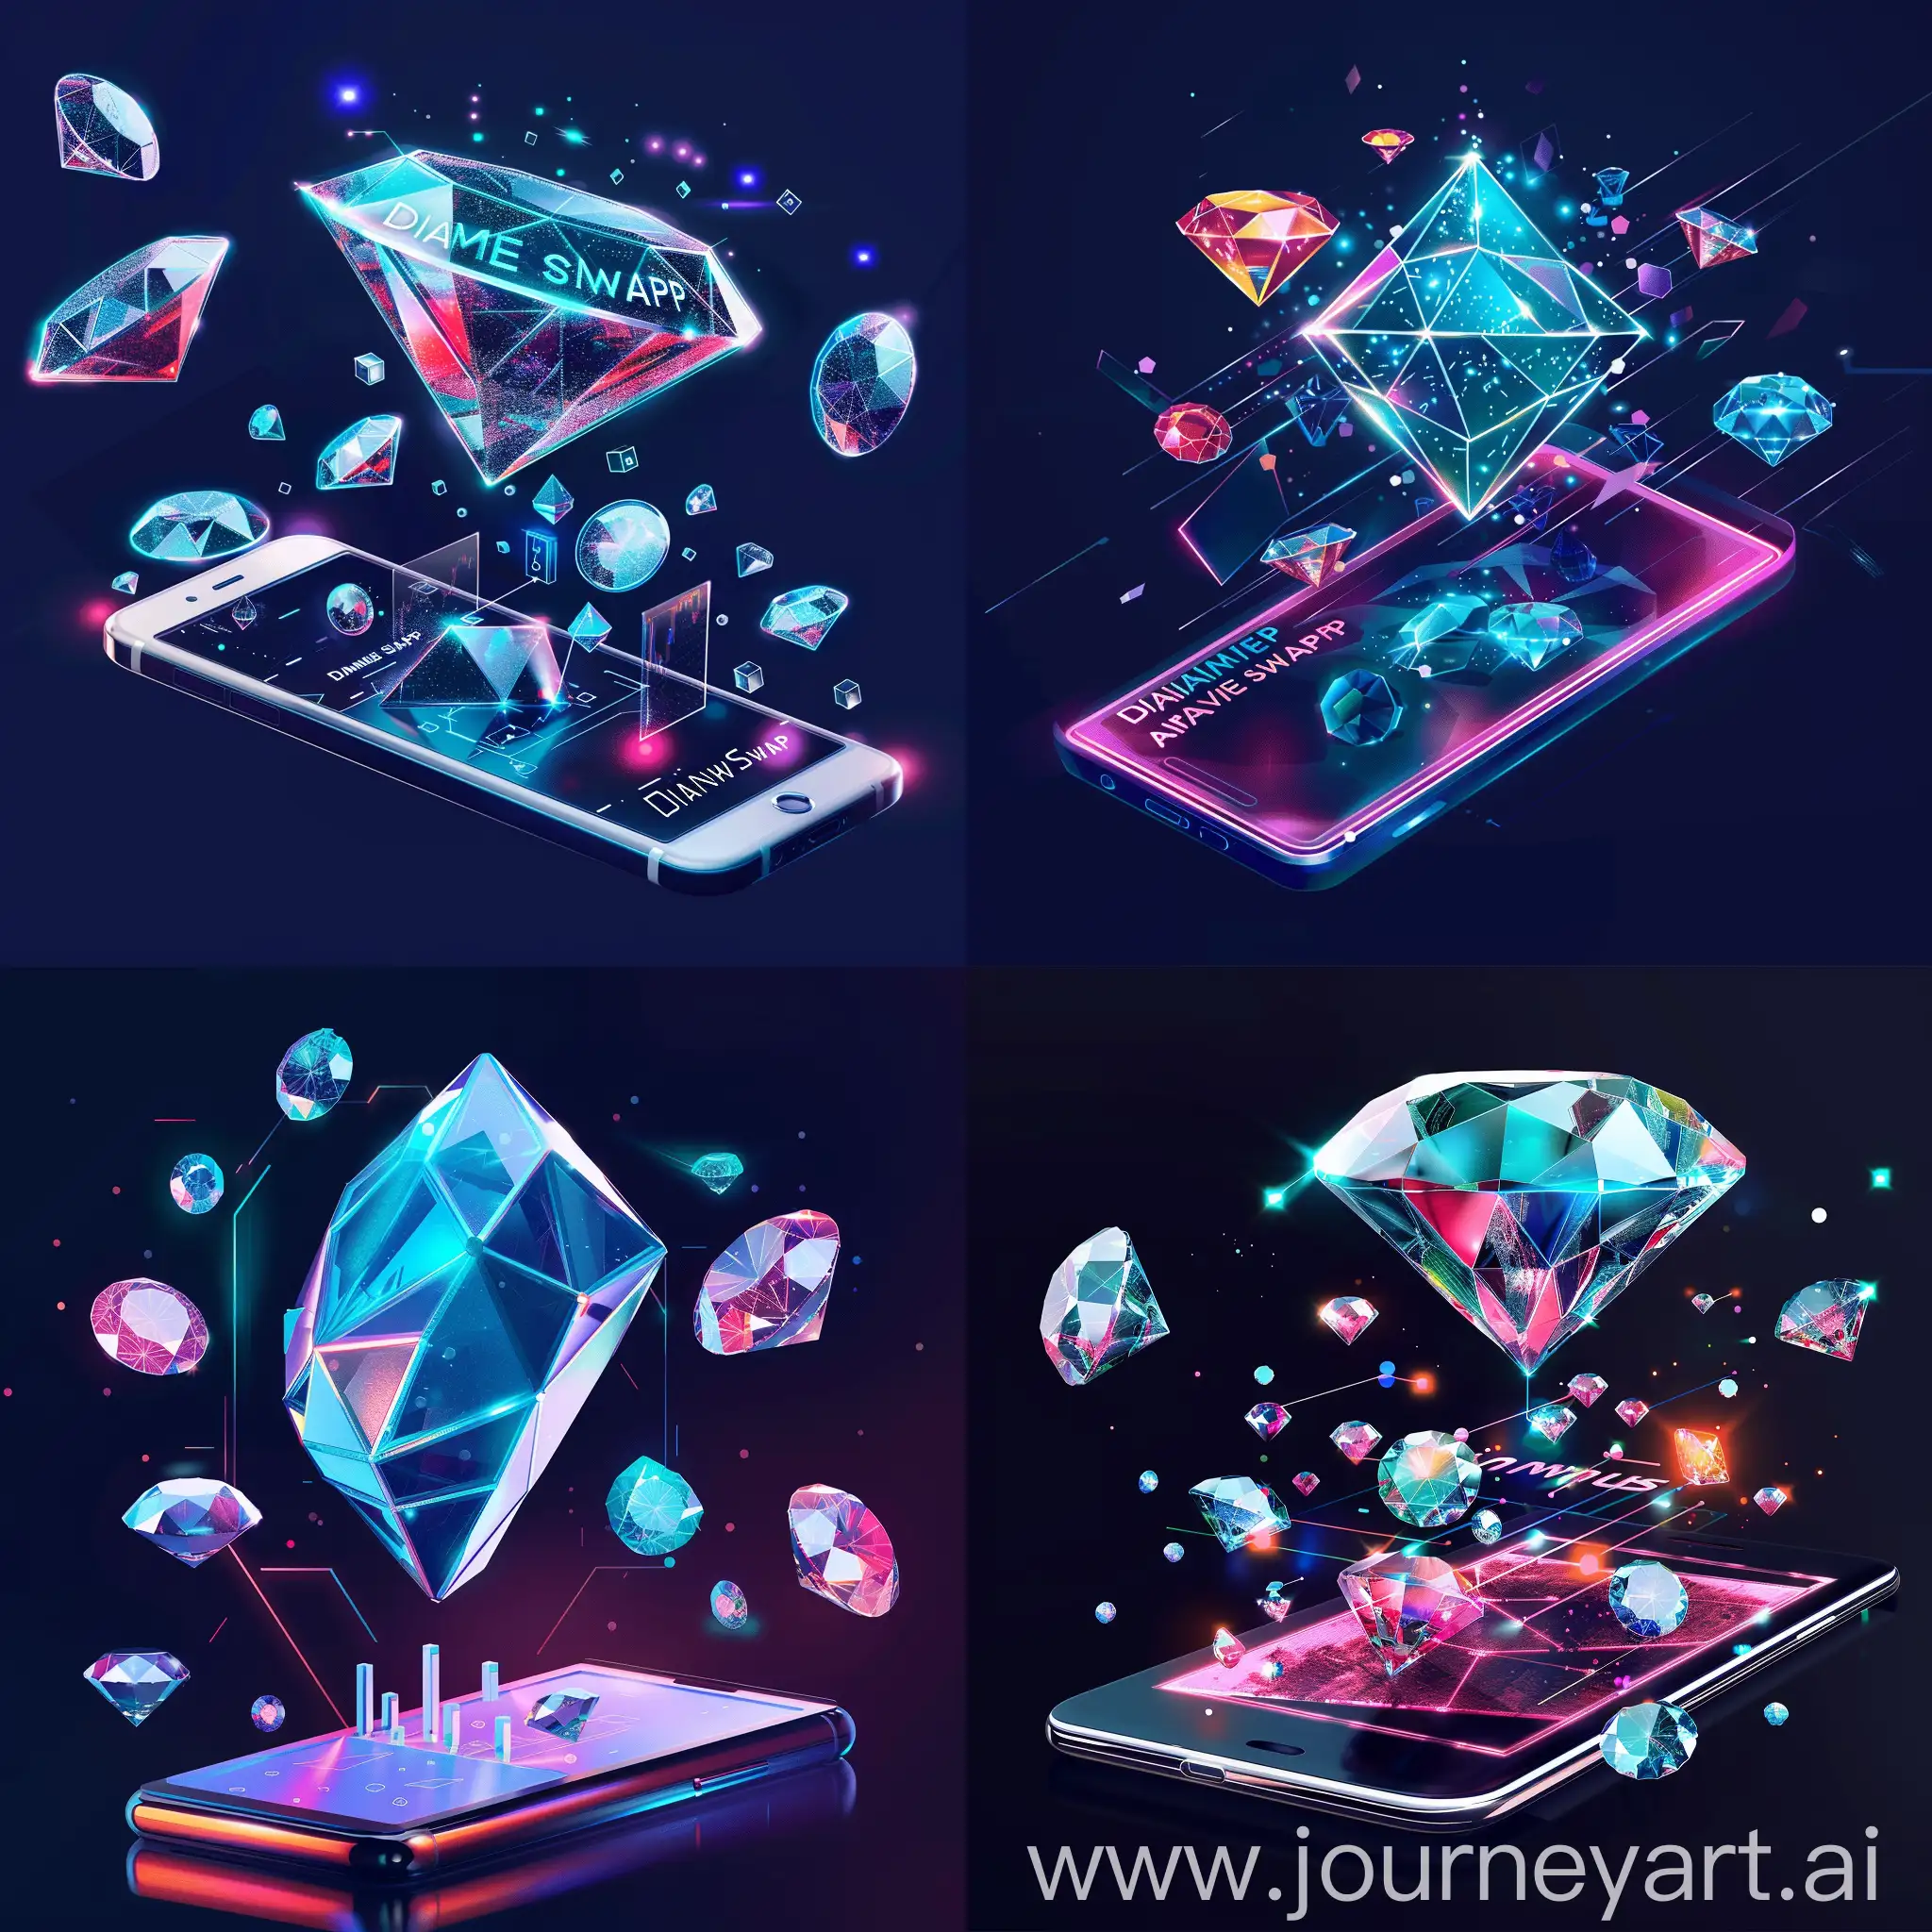 Image of a futuristic diamond-shaped cryptocurrency logo floating above a smartphone screen, surrounded by vibrant digital diamonds and tech elements. The bold text reads "Diamond Swap Airdrop Alert! 💎✨ 